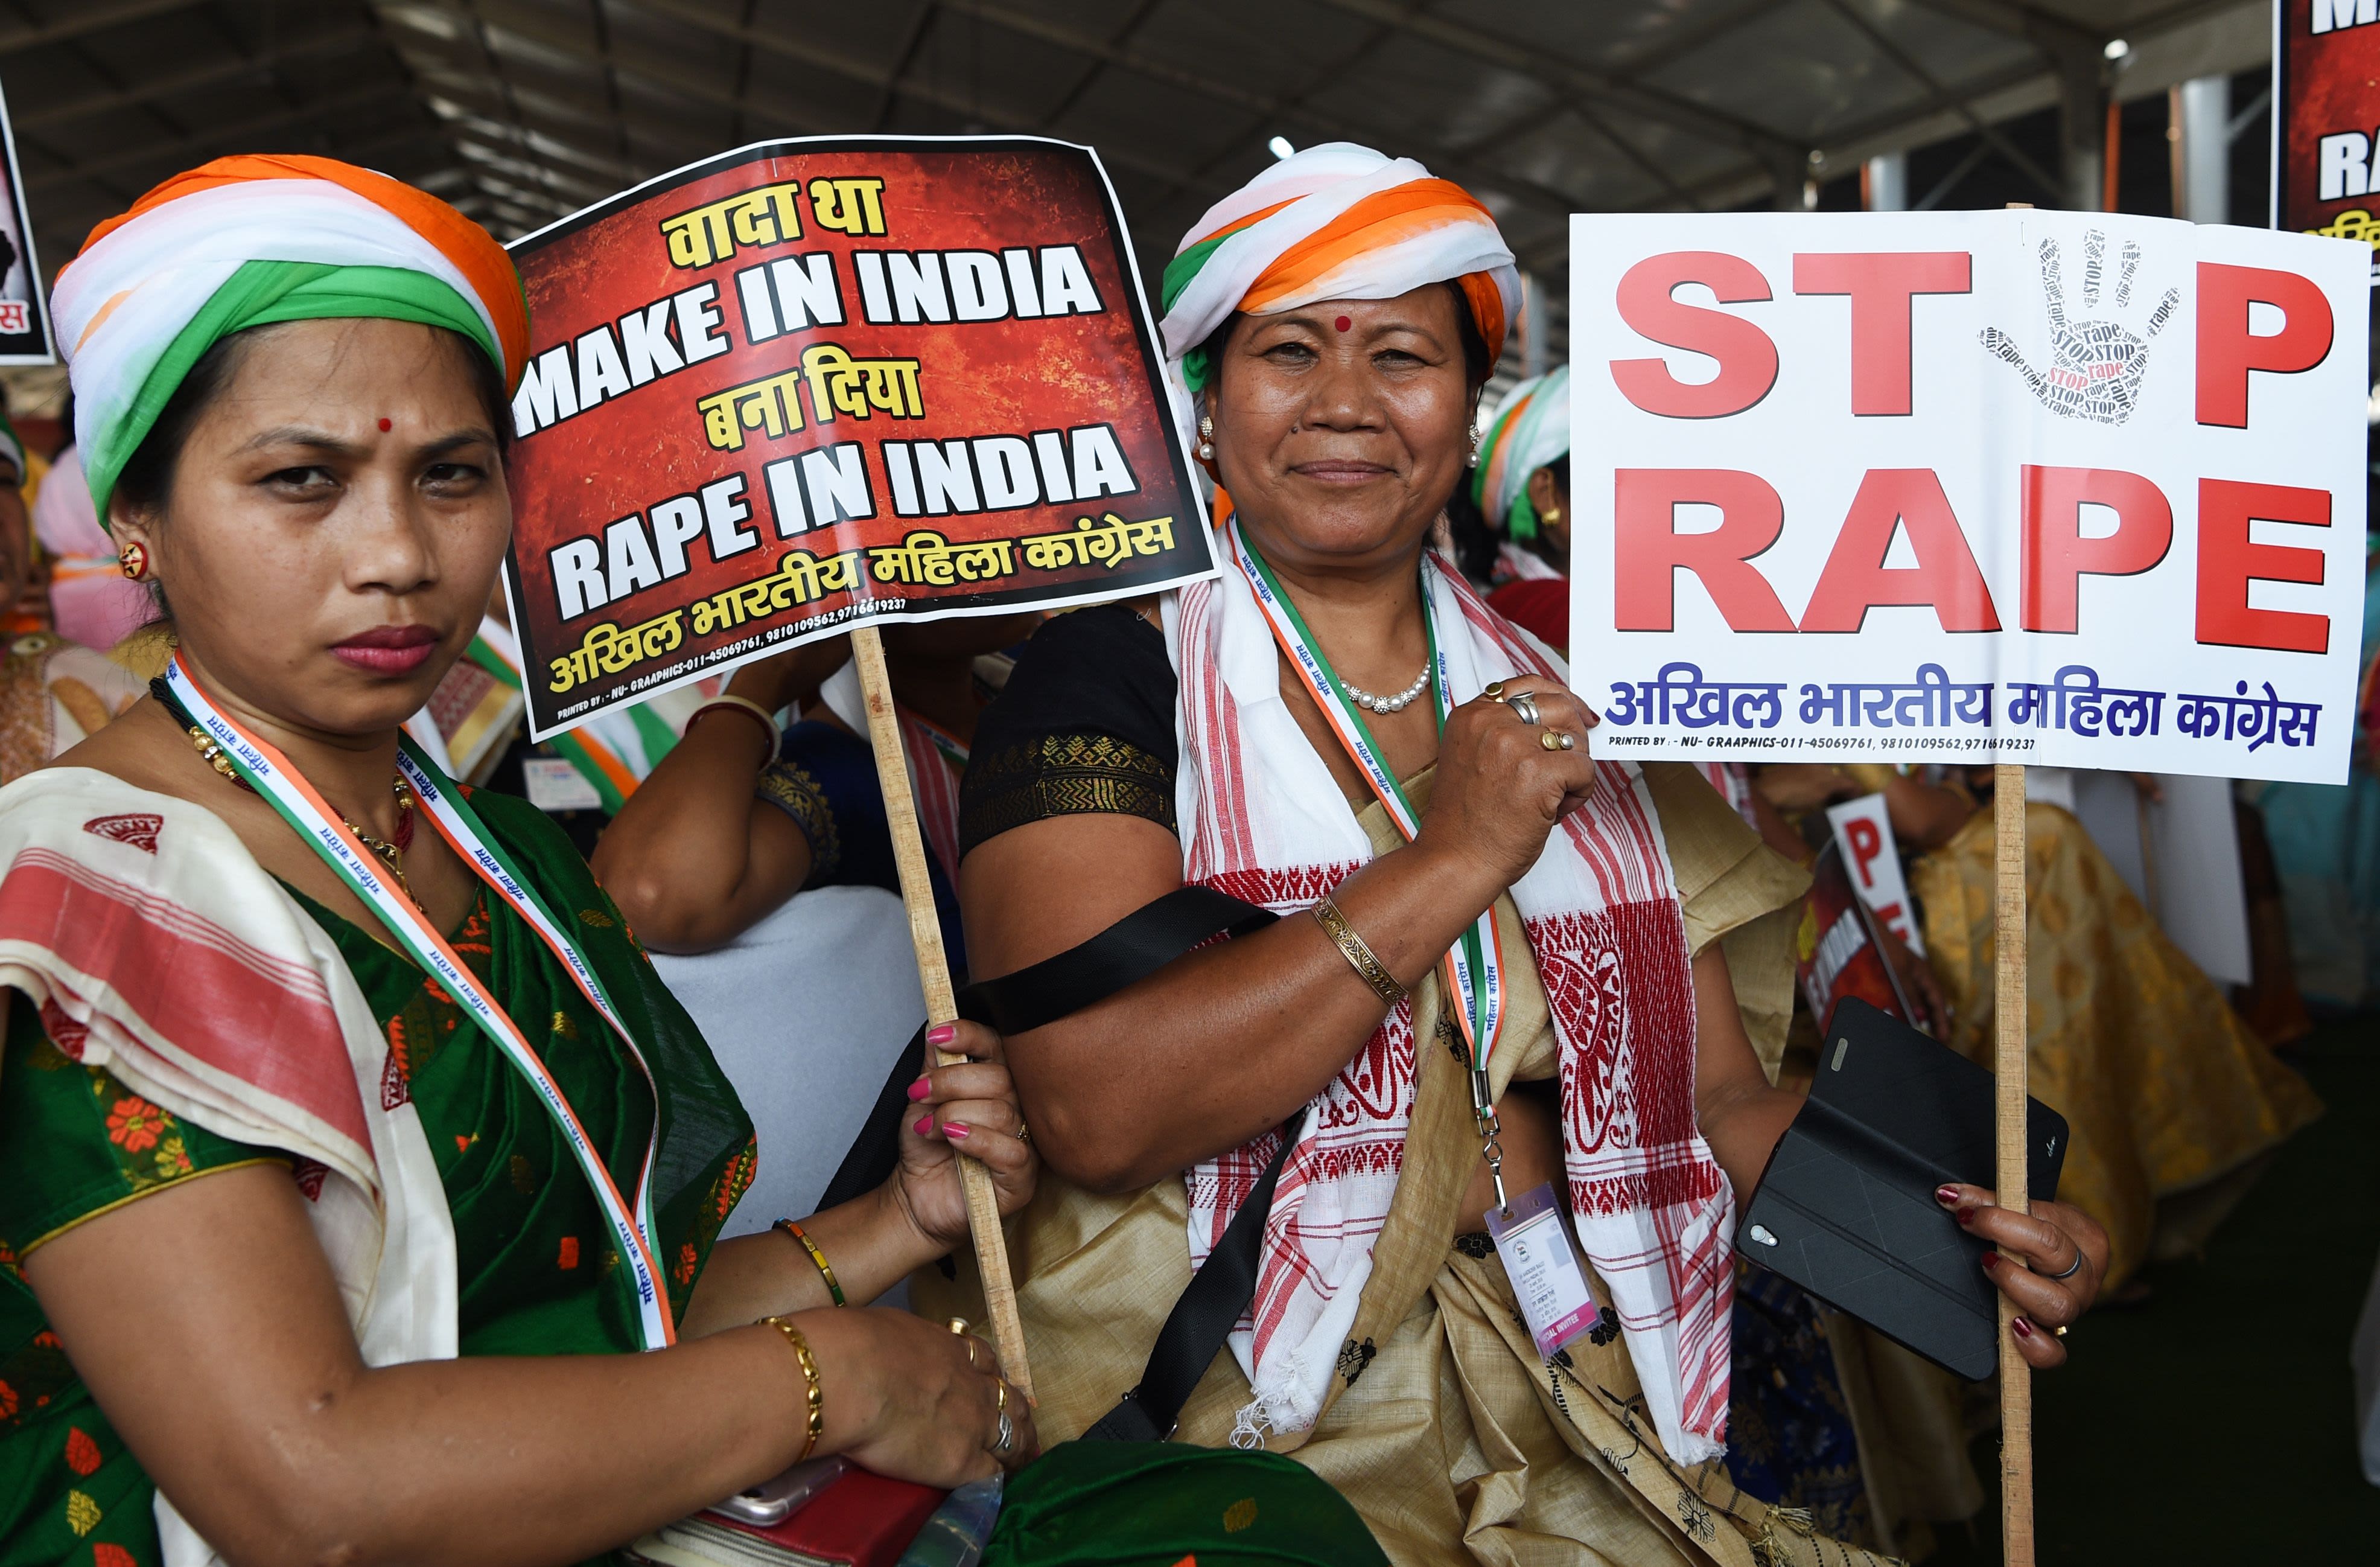 Sex Vidio Reap Anty - India launches sex offenders registry, amid spate of rape cases | CNN